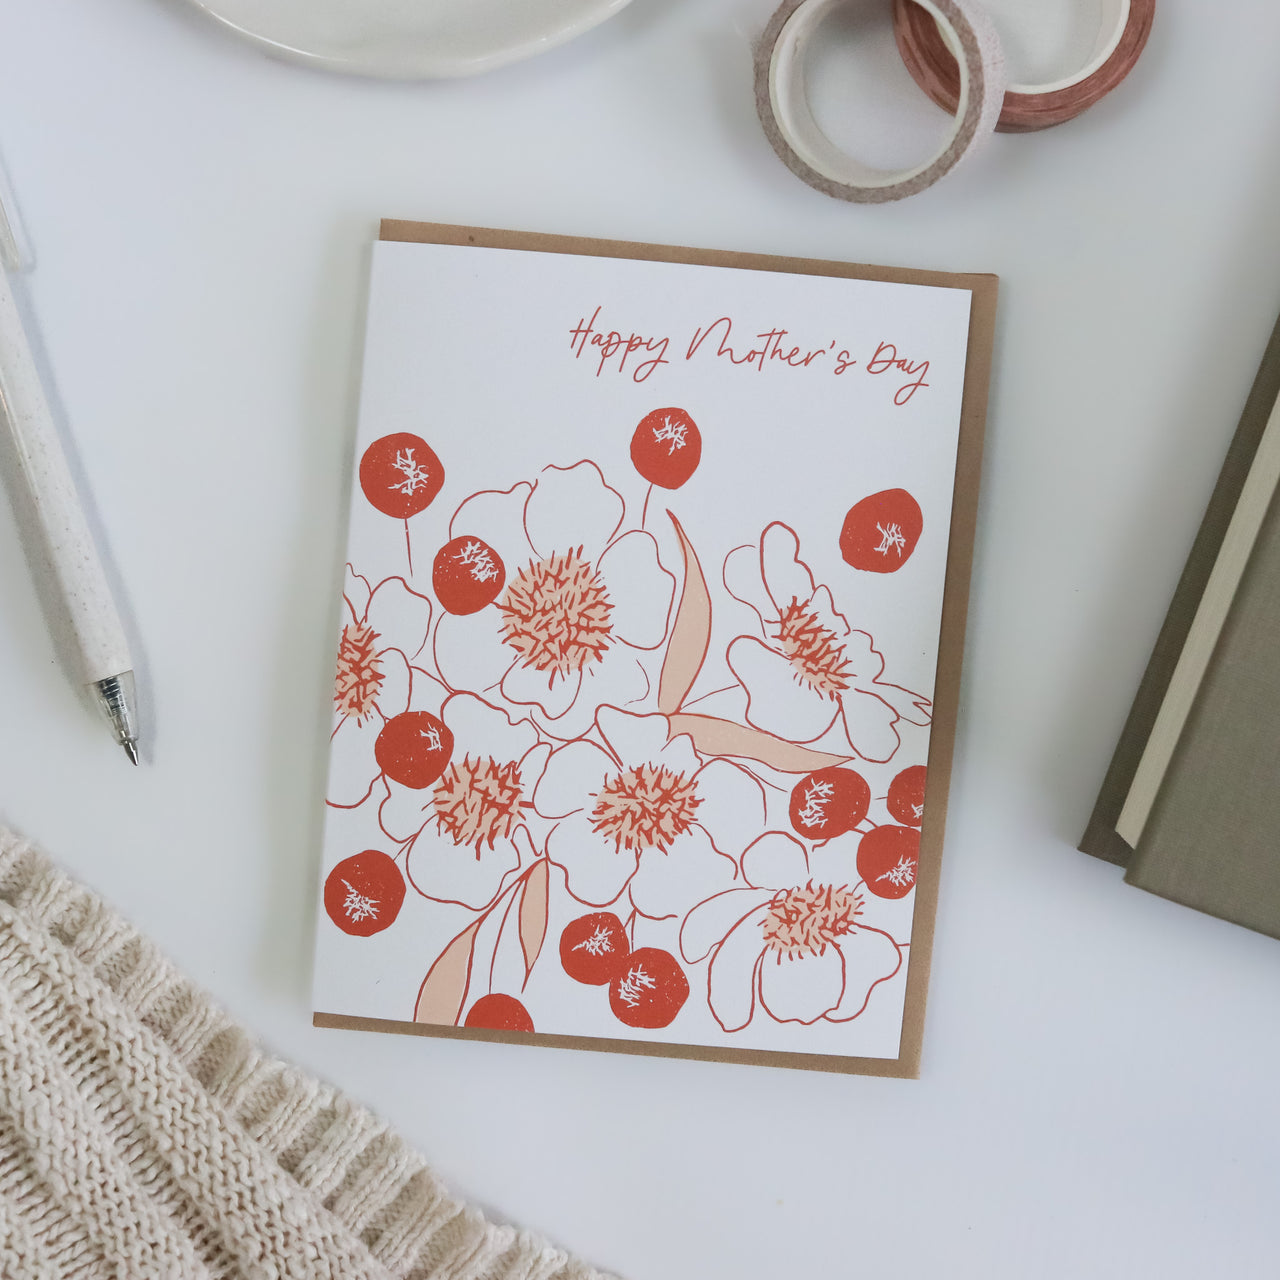 Mother's Day Floral Bouquet Card | Overflow & Co.